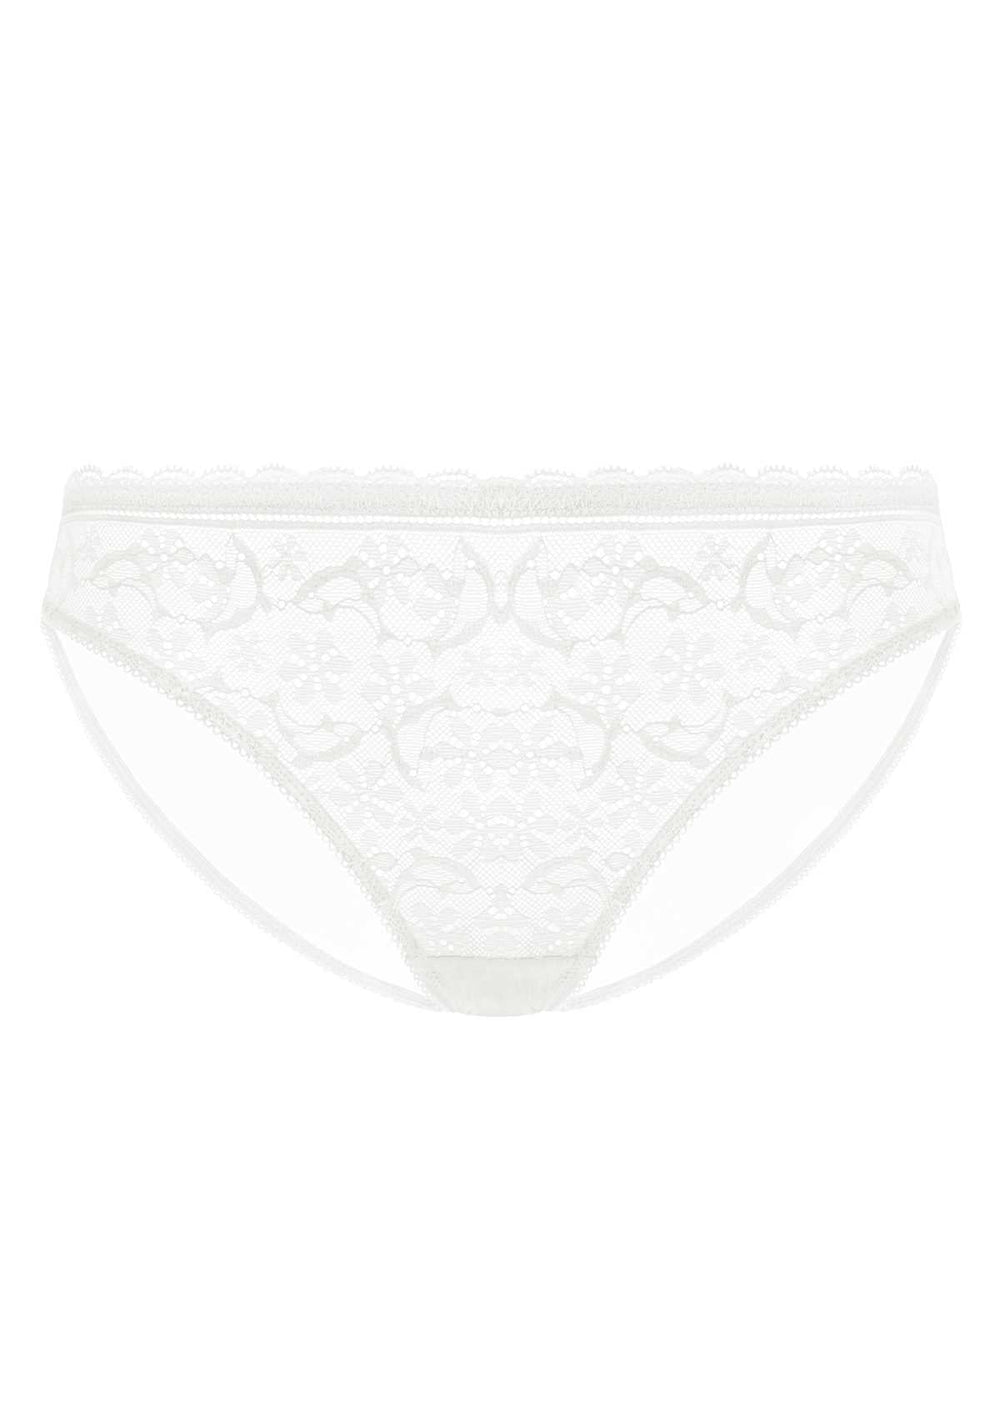 HSIA Anemone Lace Mesh Dolphin-Patterned Mid-Low Rise Bikini Underwear